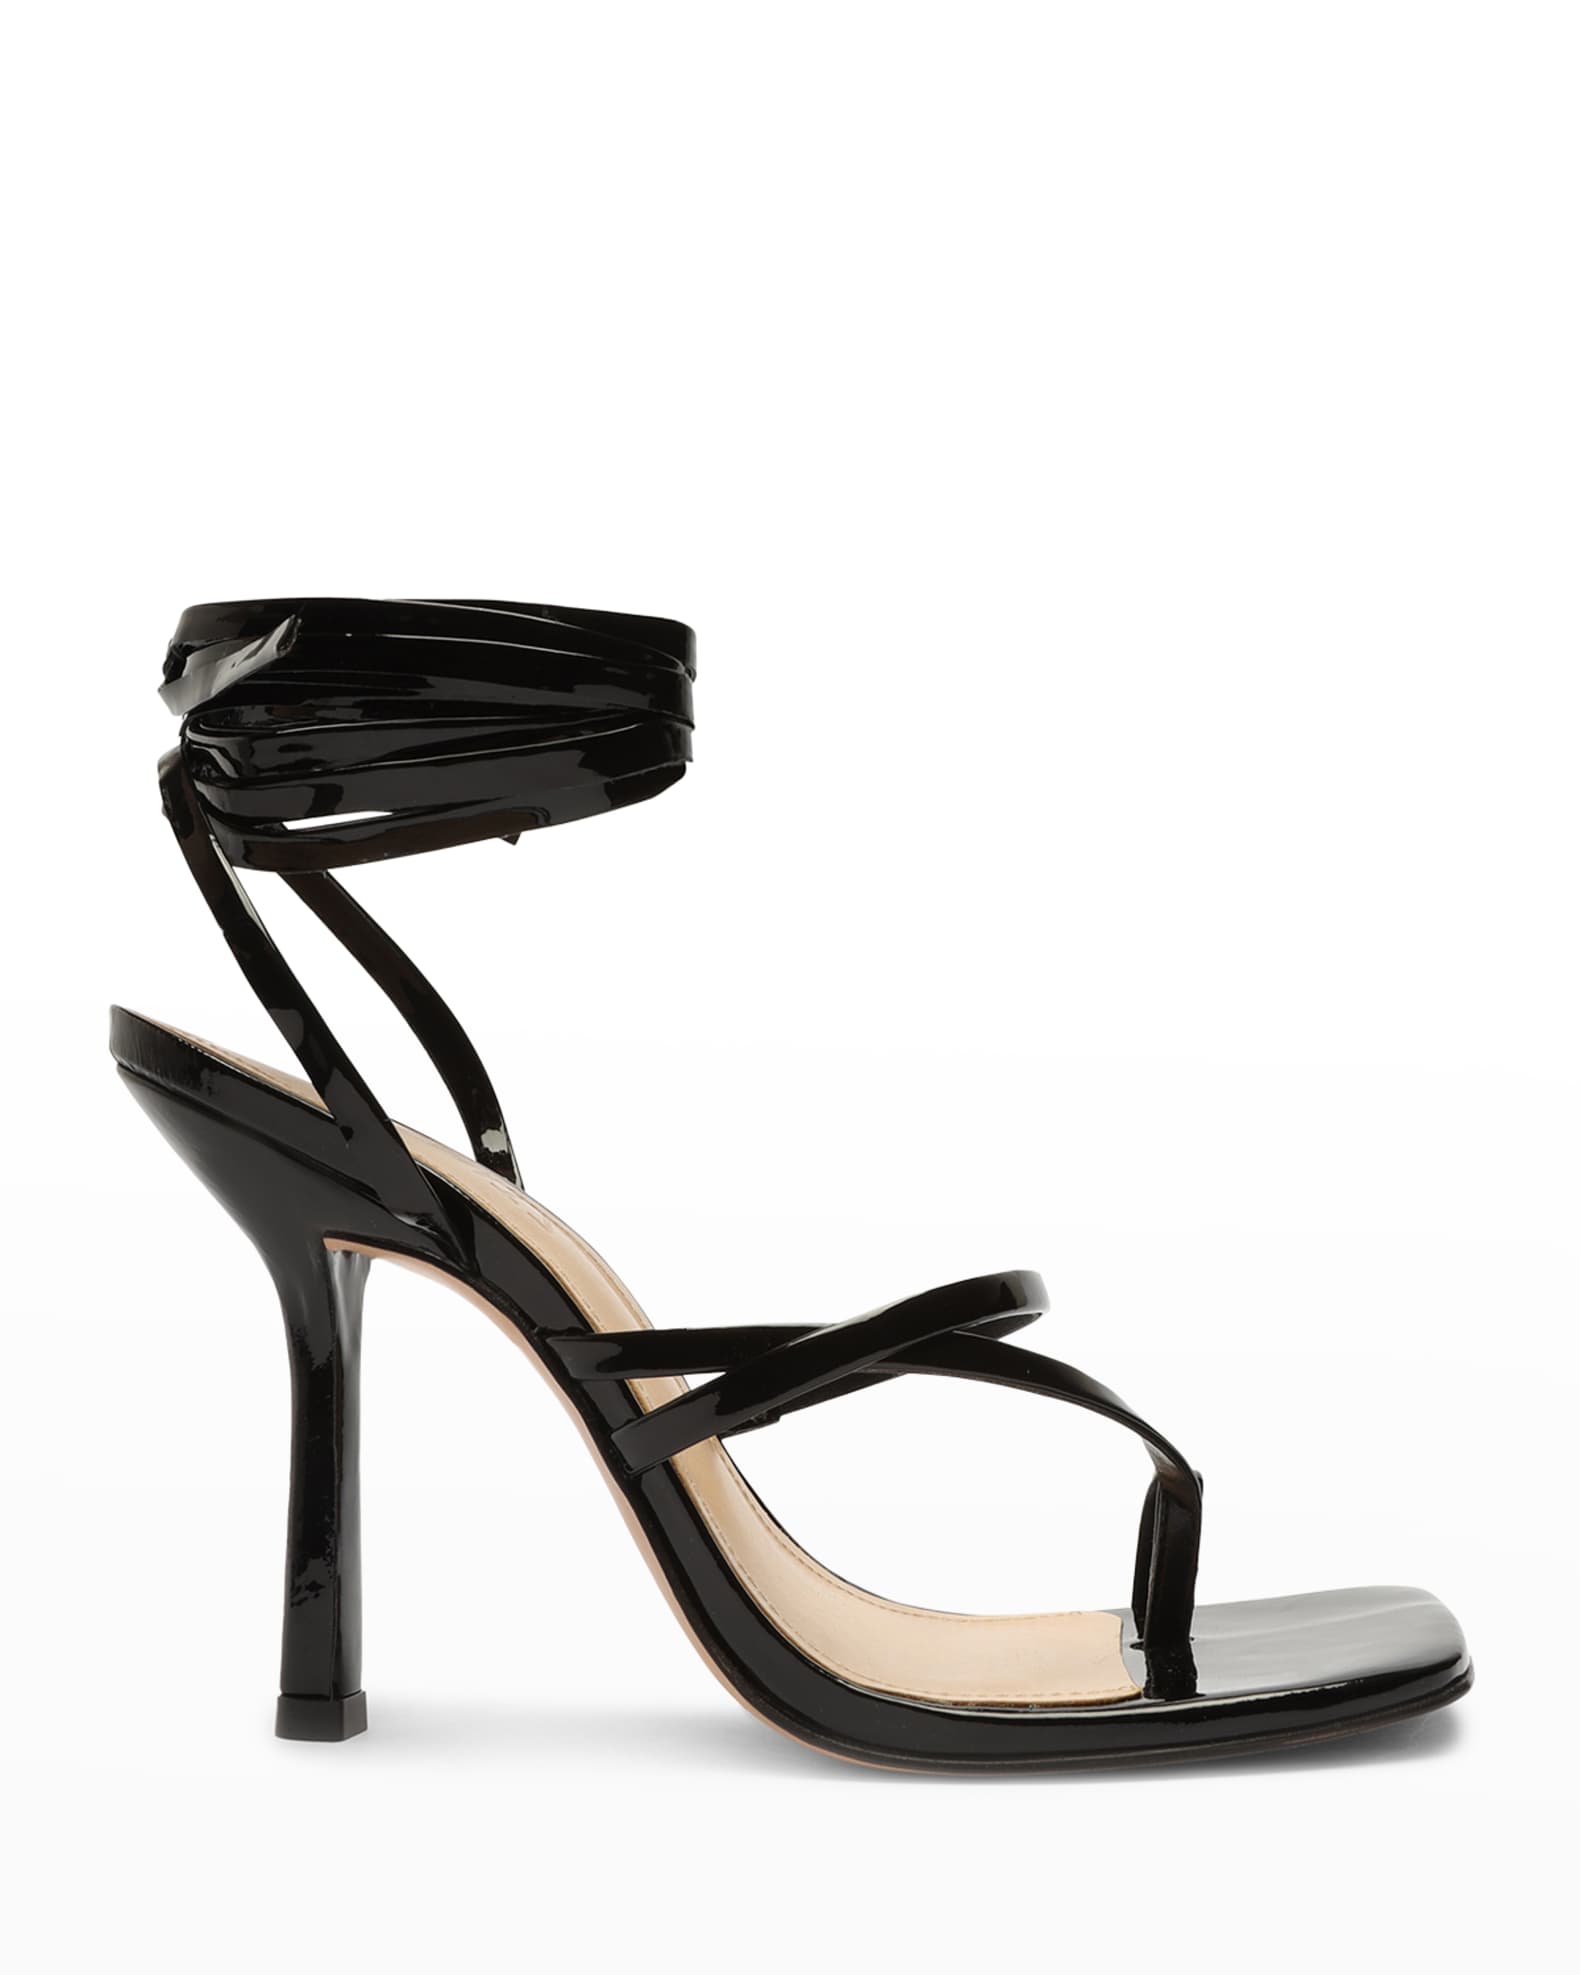 Schutz Lily Embossed Ankle-Wrap Sandals | Neiman Marcus